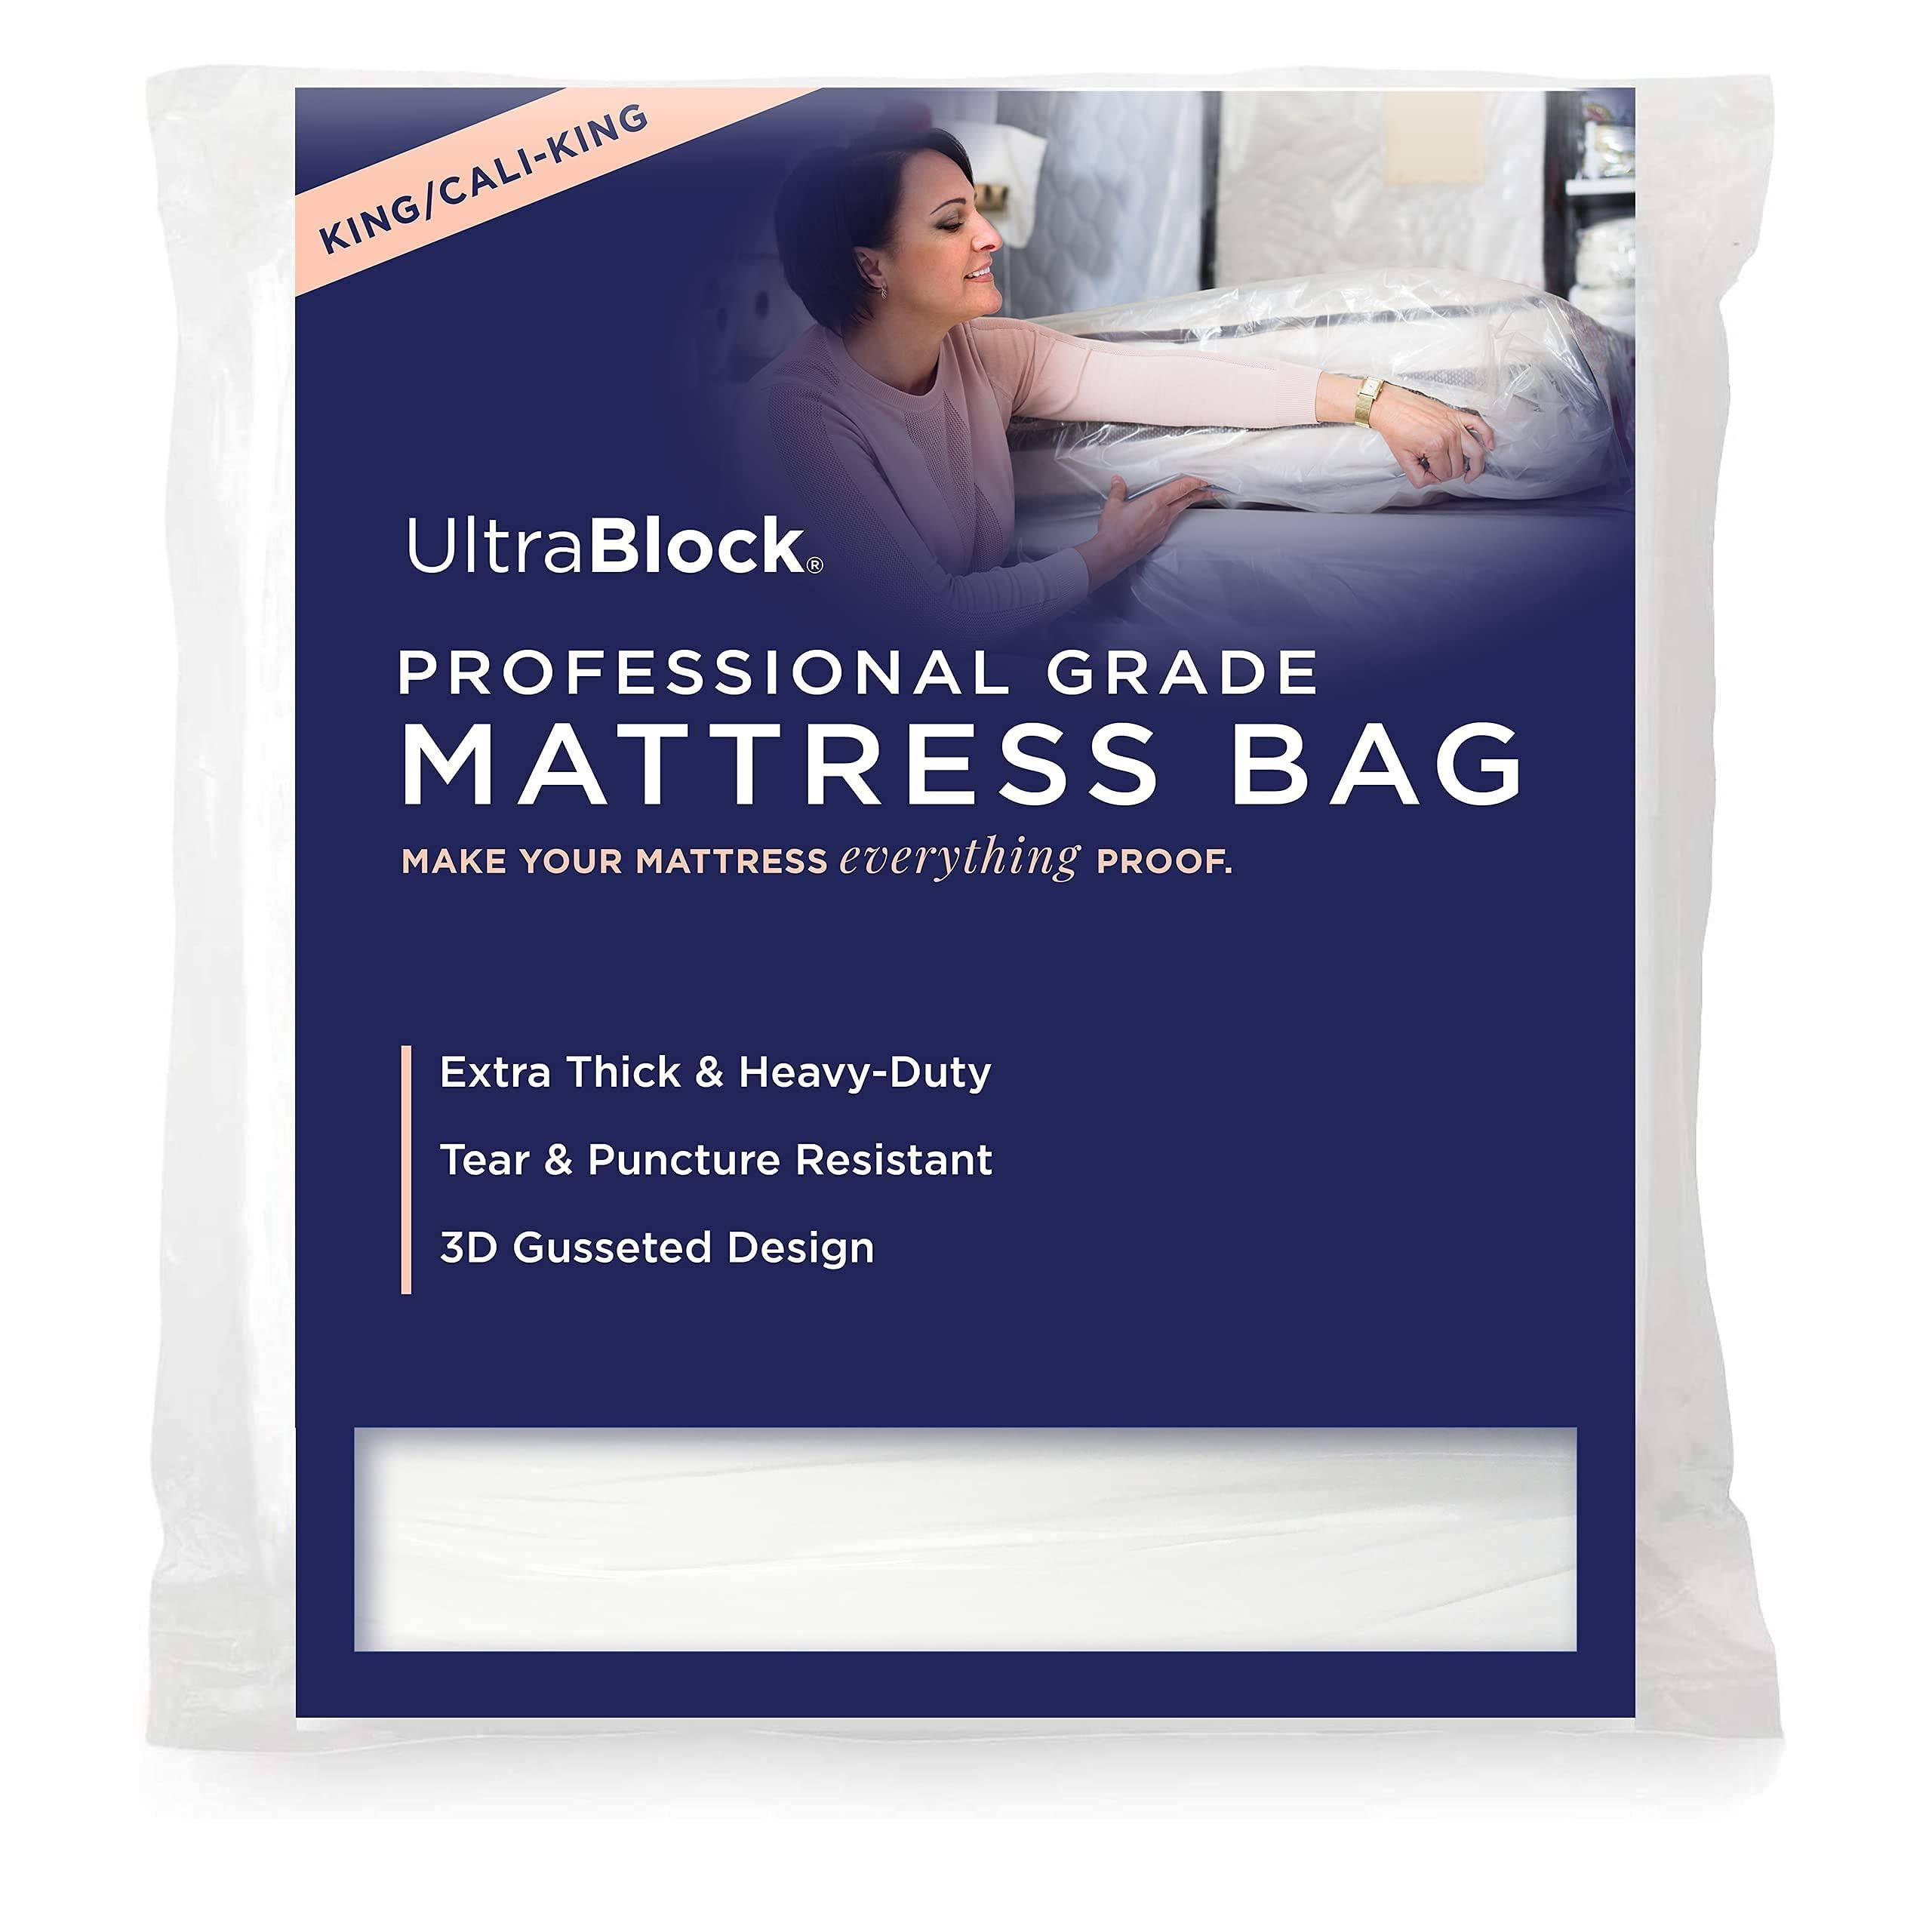 Ultrablock Mattress Bag - Durable Protection for Moving and Storage | Image